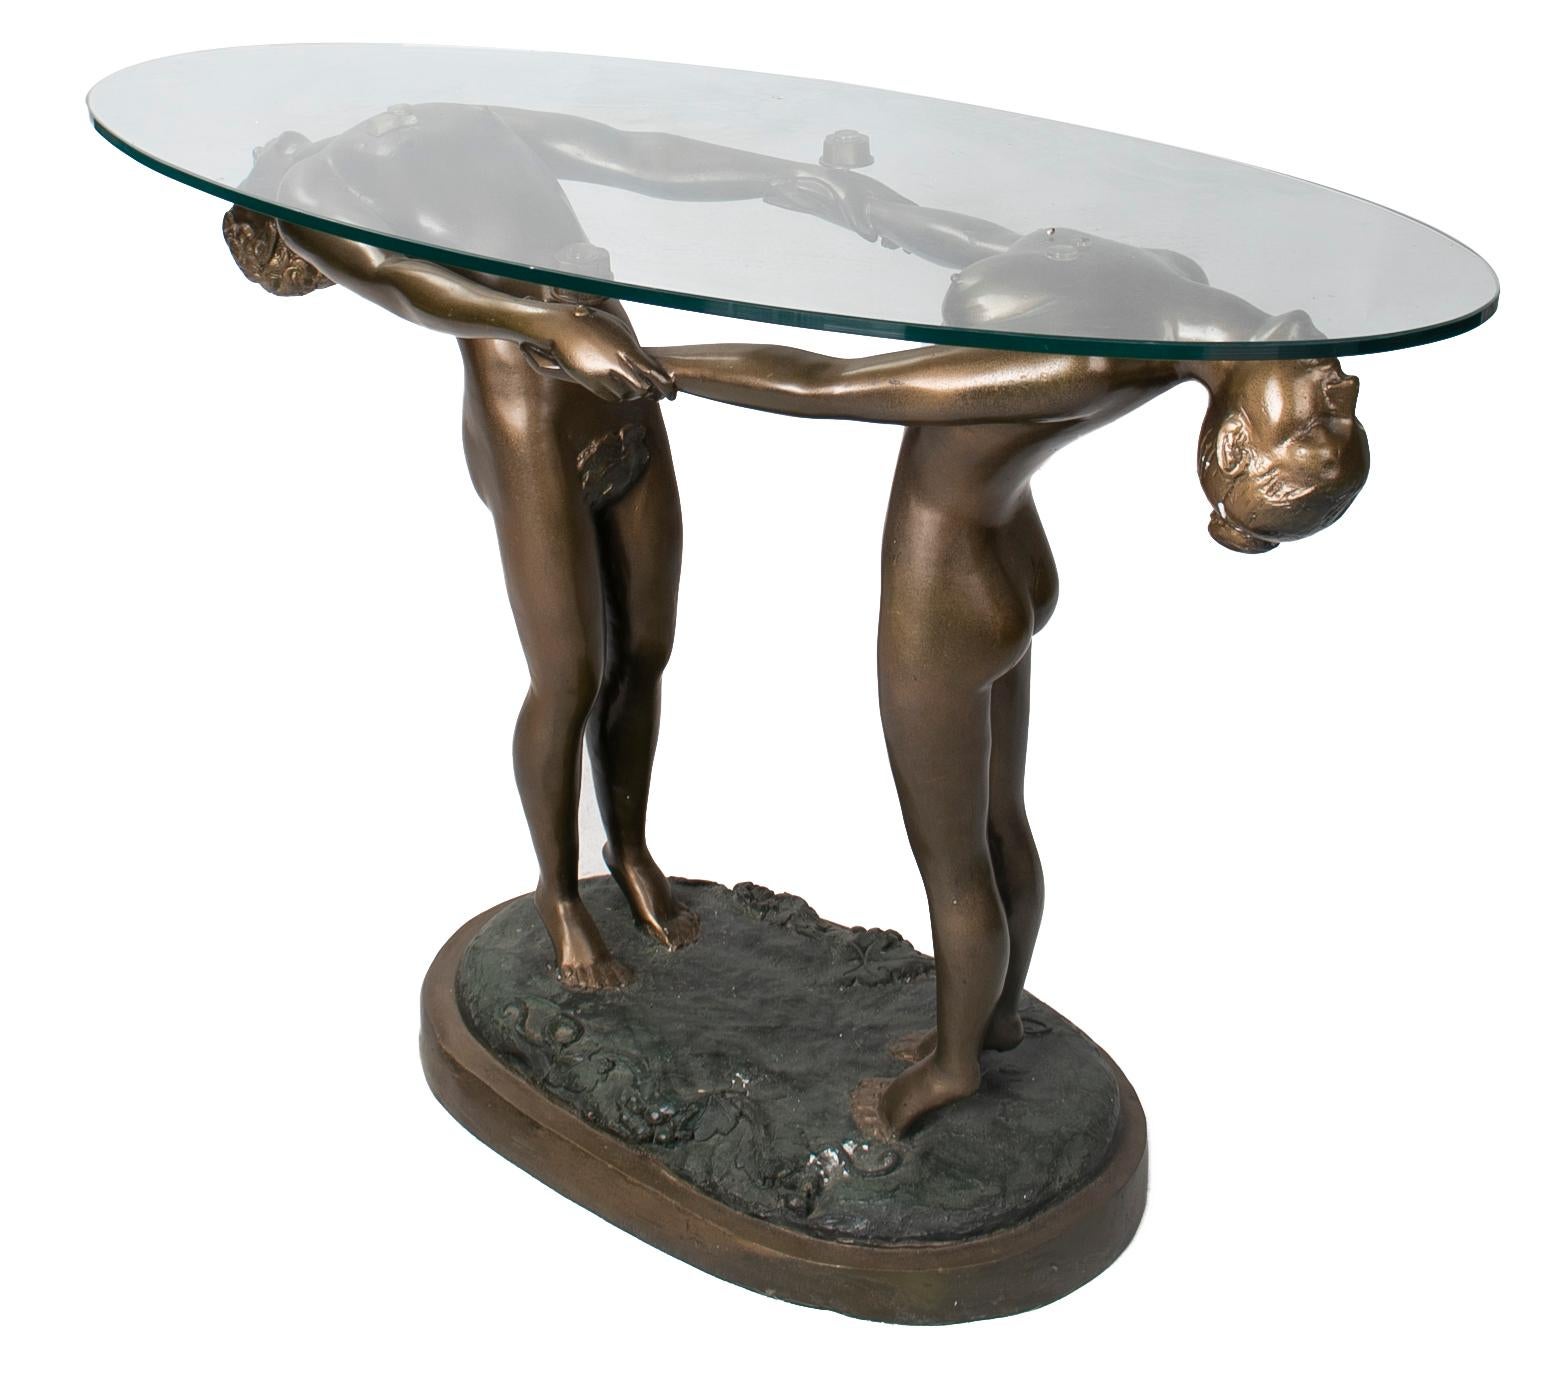 1980s bronze man and woman sculpture pedestal table with glass top.